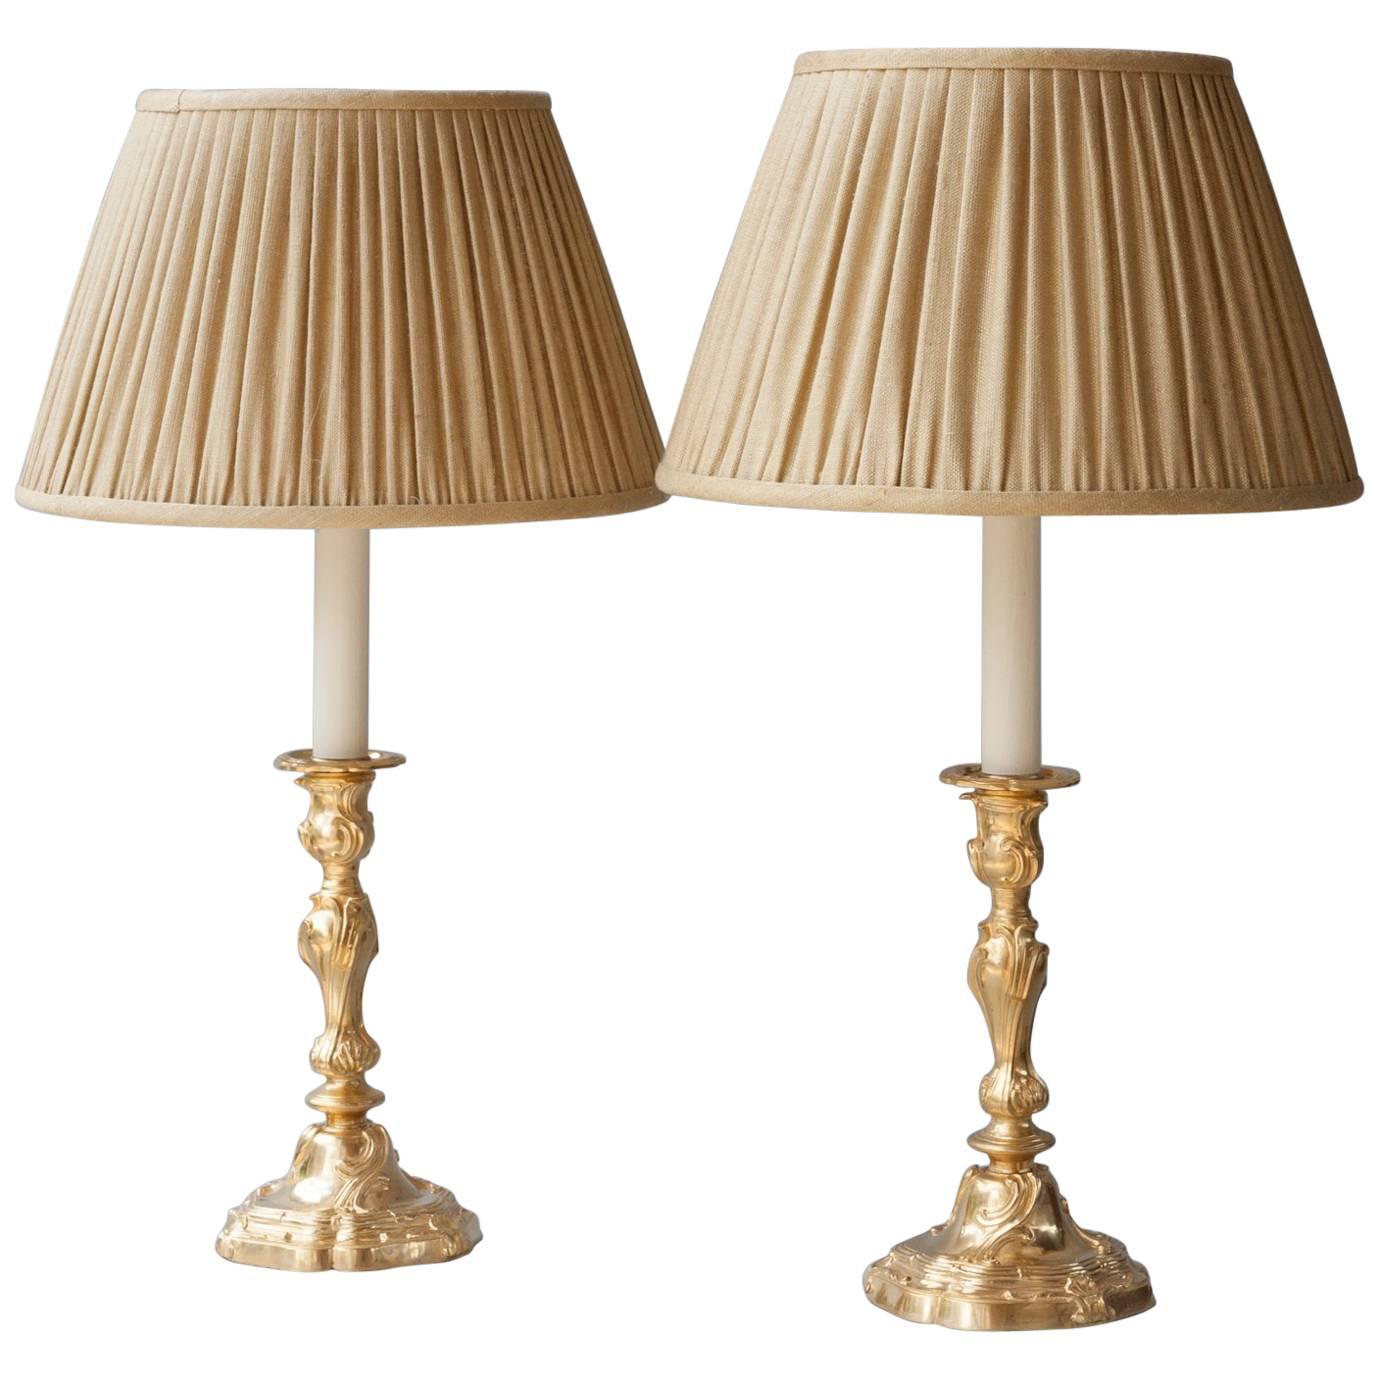 Late 19th Century Louis XV Style Rococo Candlesticks Converted to Table Lamps For Sale